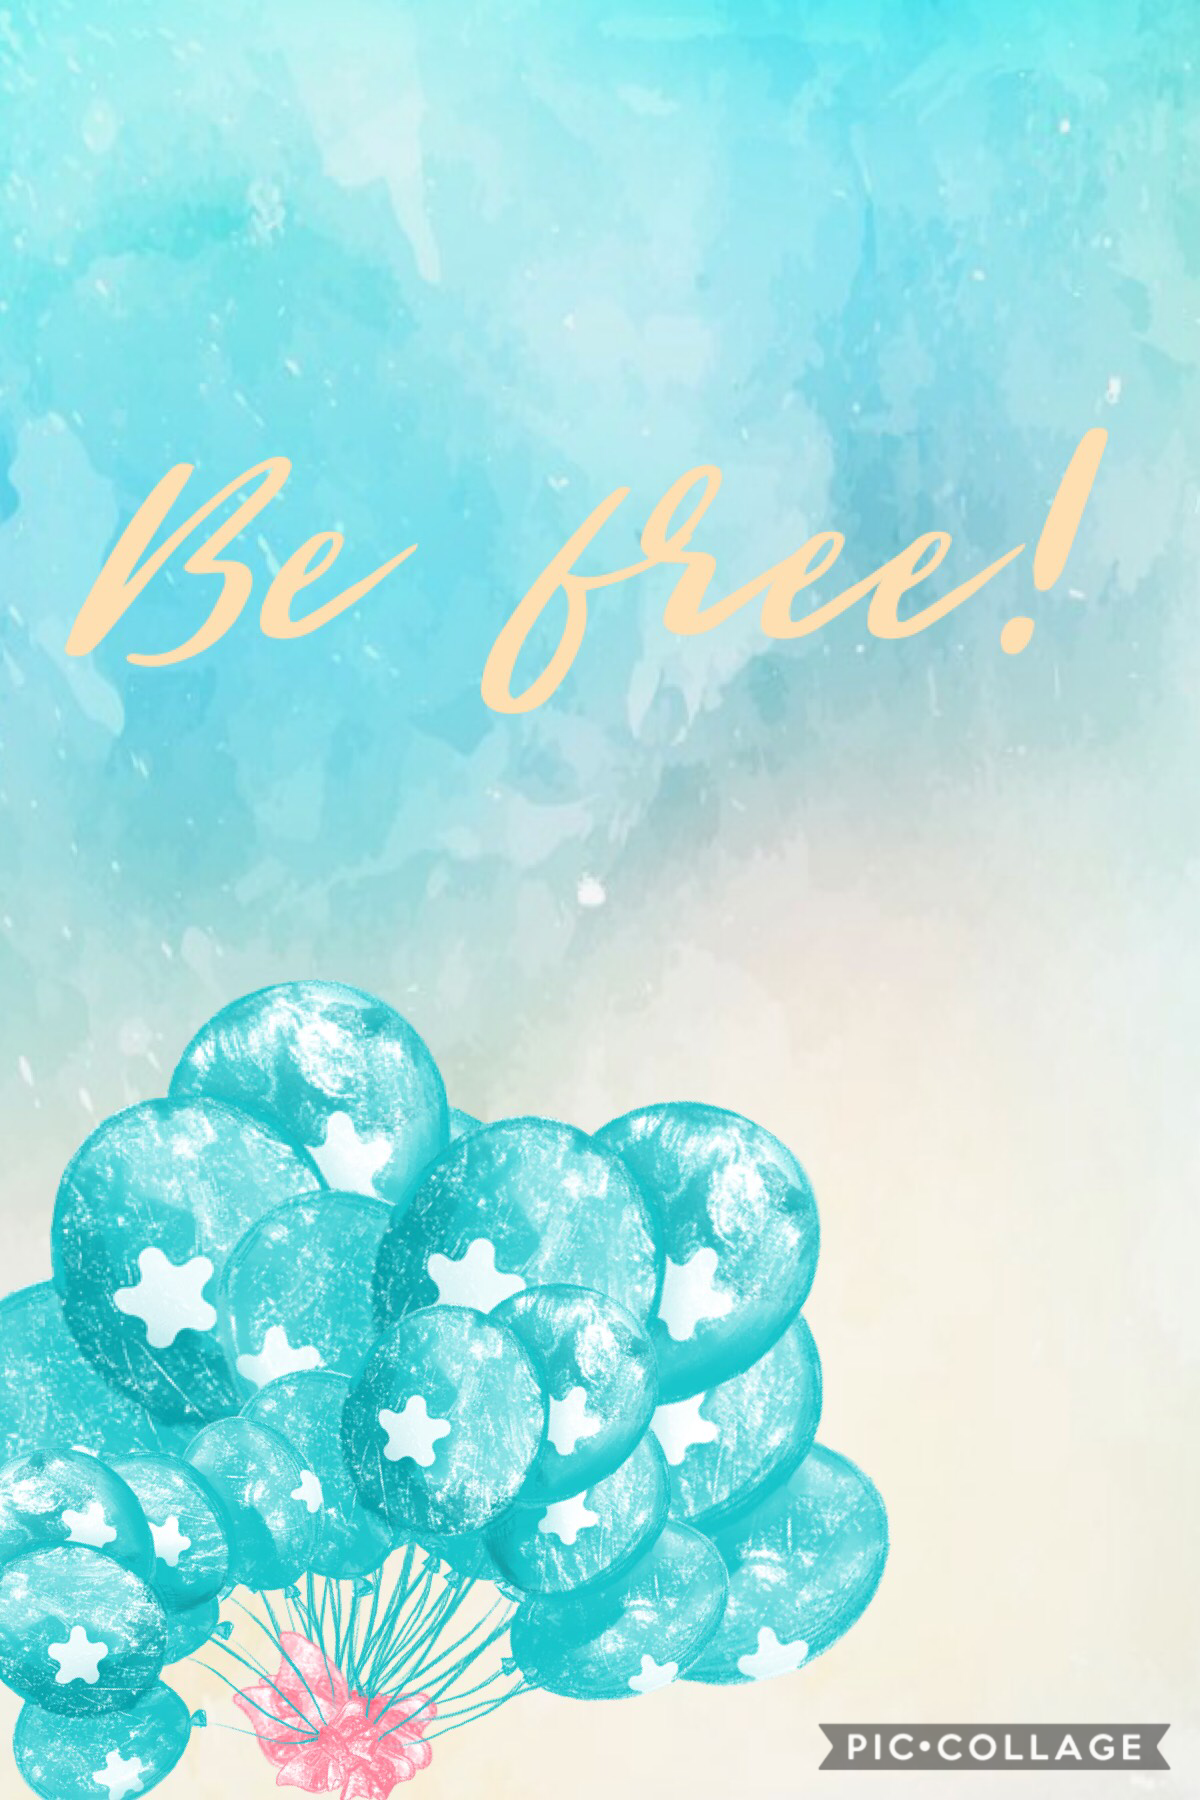 Be you and be free!